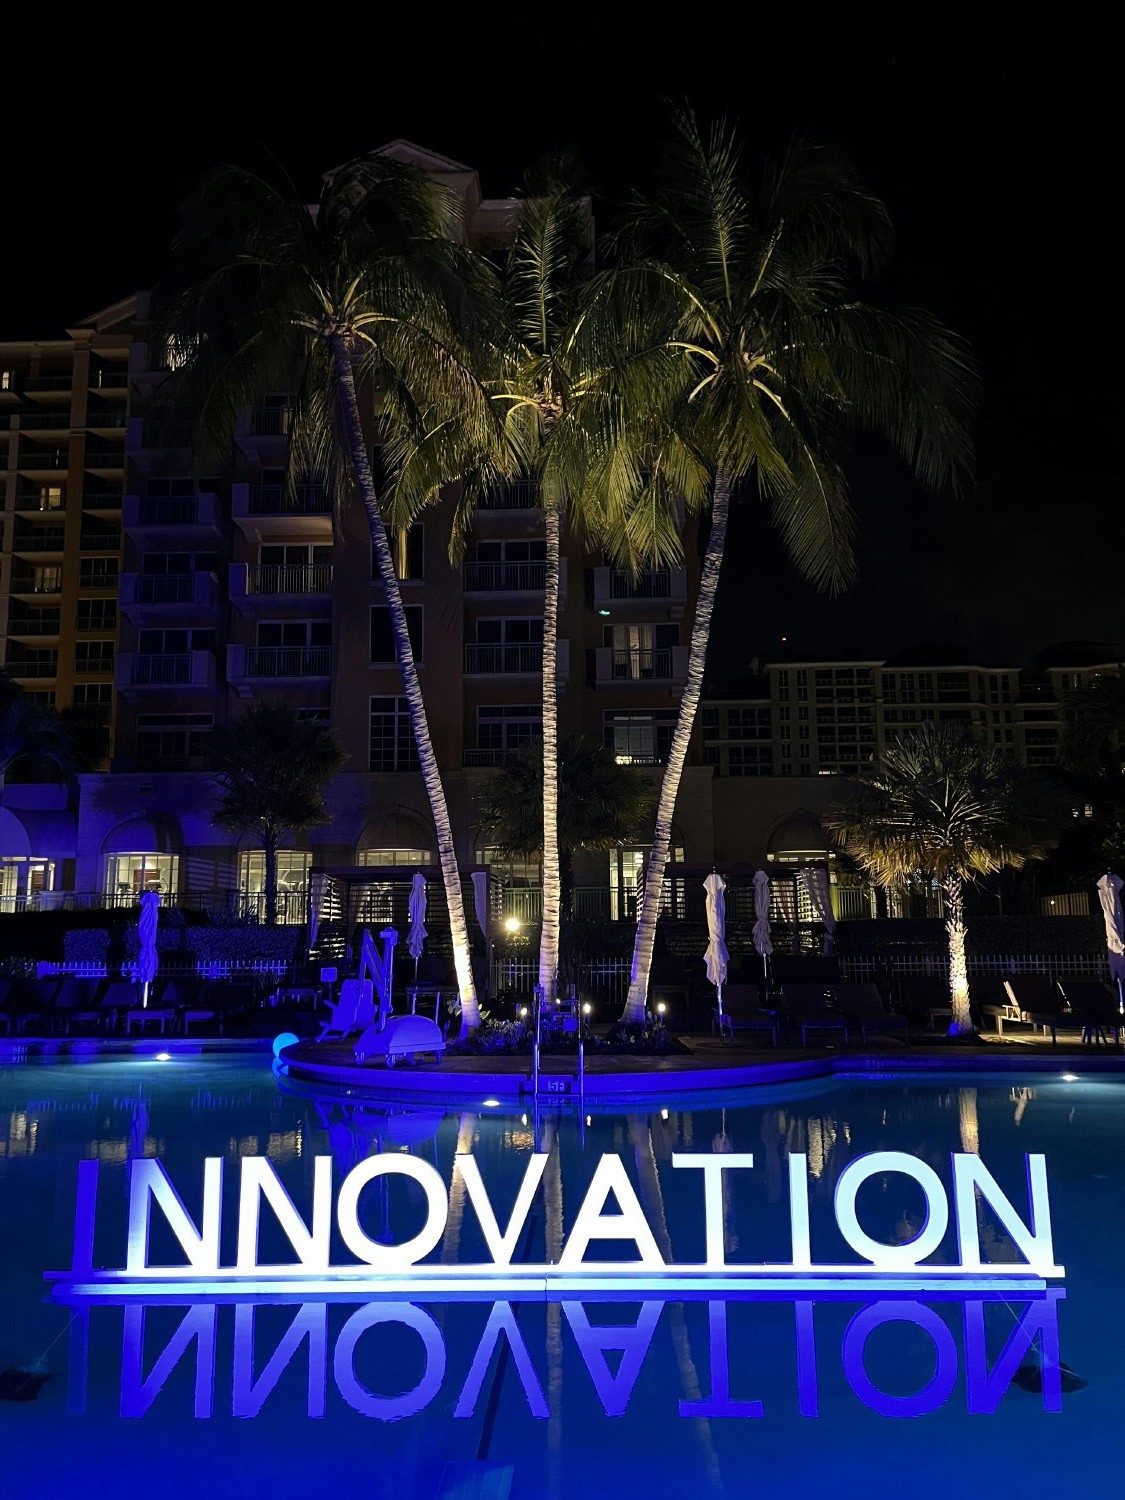 We Celebrated  Our Innovation Wins, Including Our Annual Innovation Certificate Program, At a Party in Miami